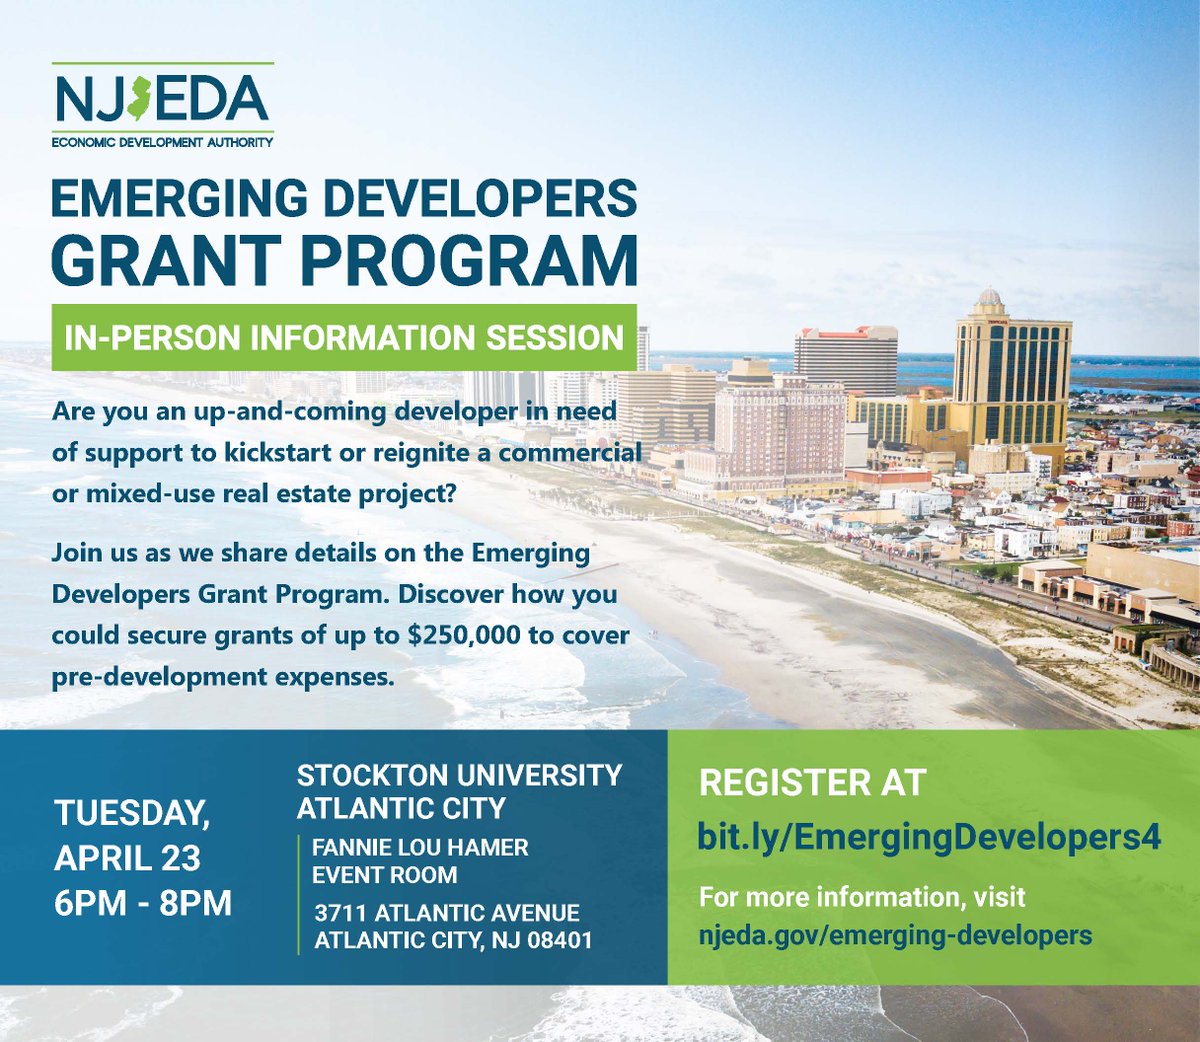 The NJEDA will host an in-person information session at Stockton University’s Atlantic City Campus on April 23rd to educate rising real estate developers about the NJEDA’s new $20 million Emerging Developers Grant Program! Register here: bit.ly/EmergingDevelo…